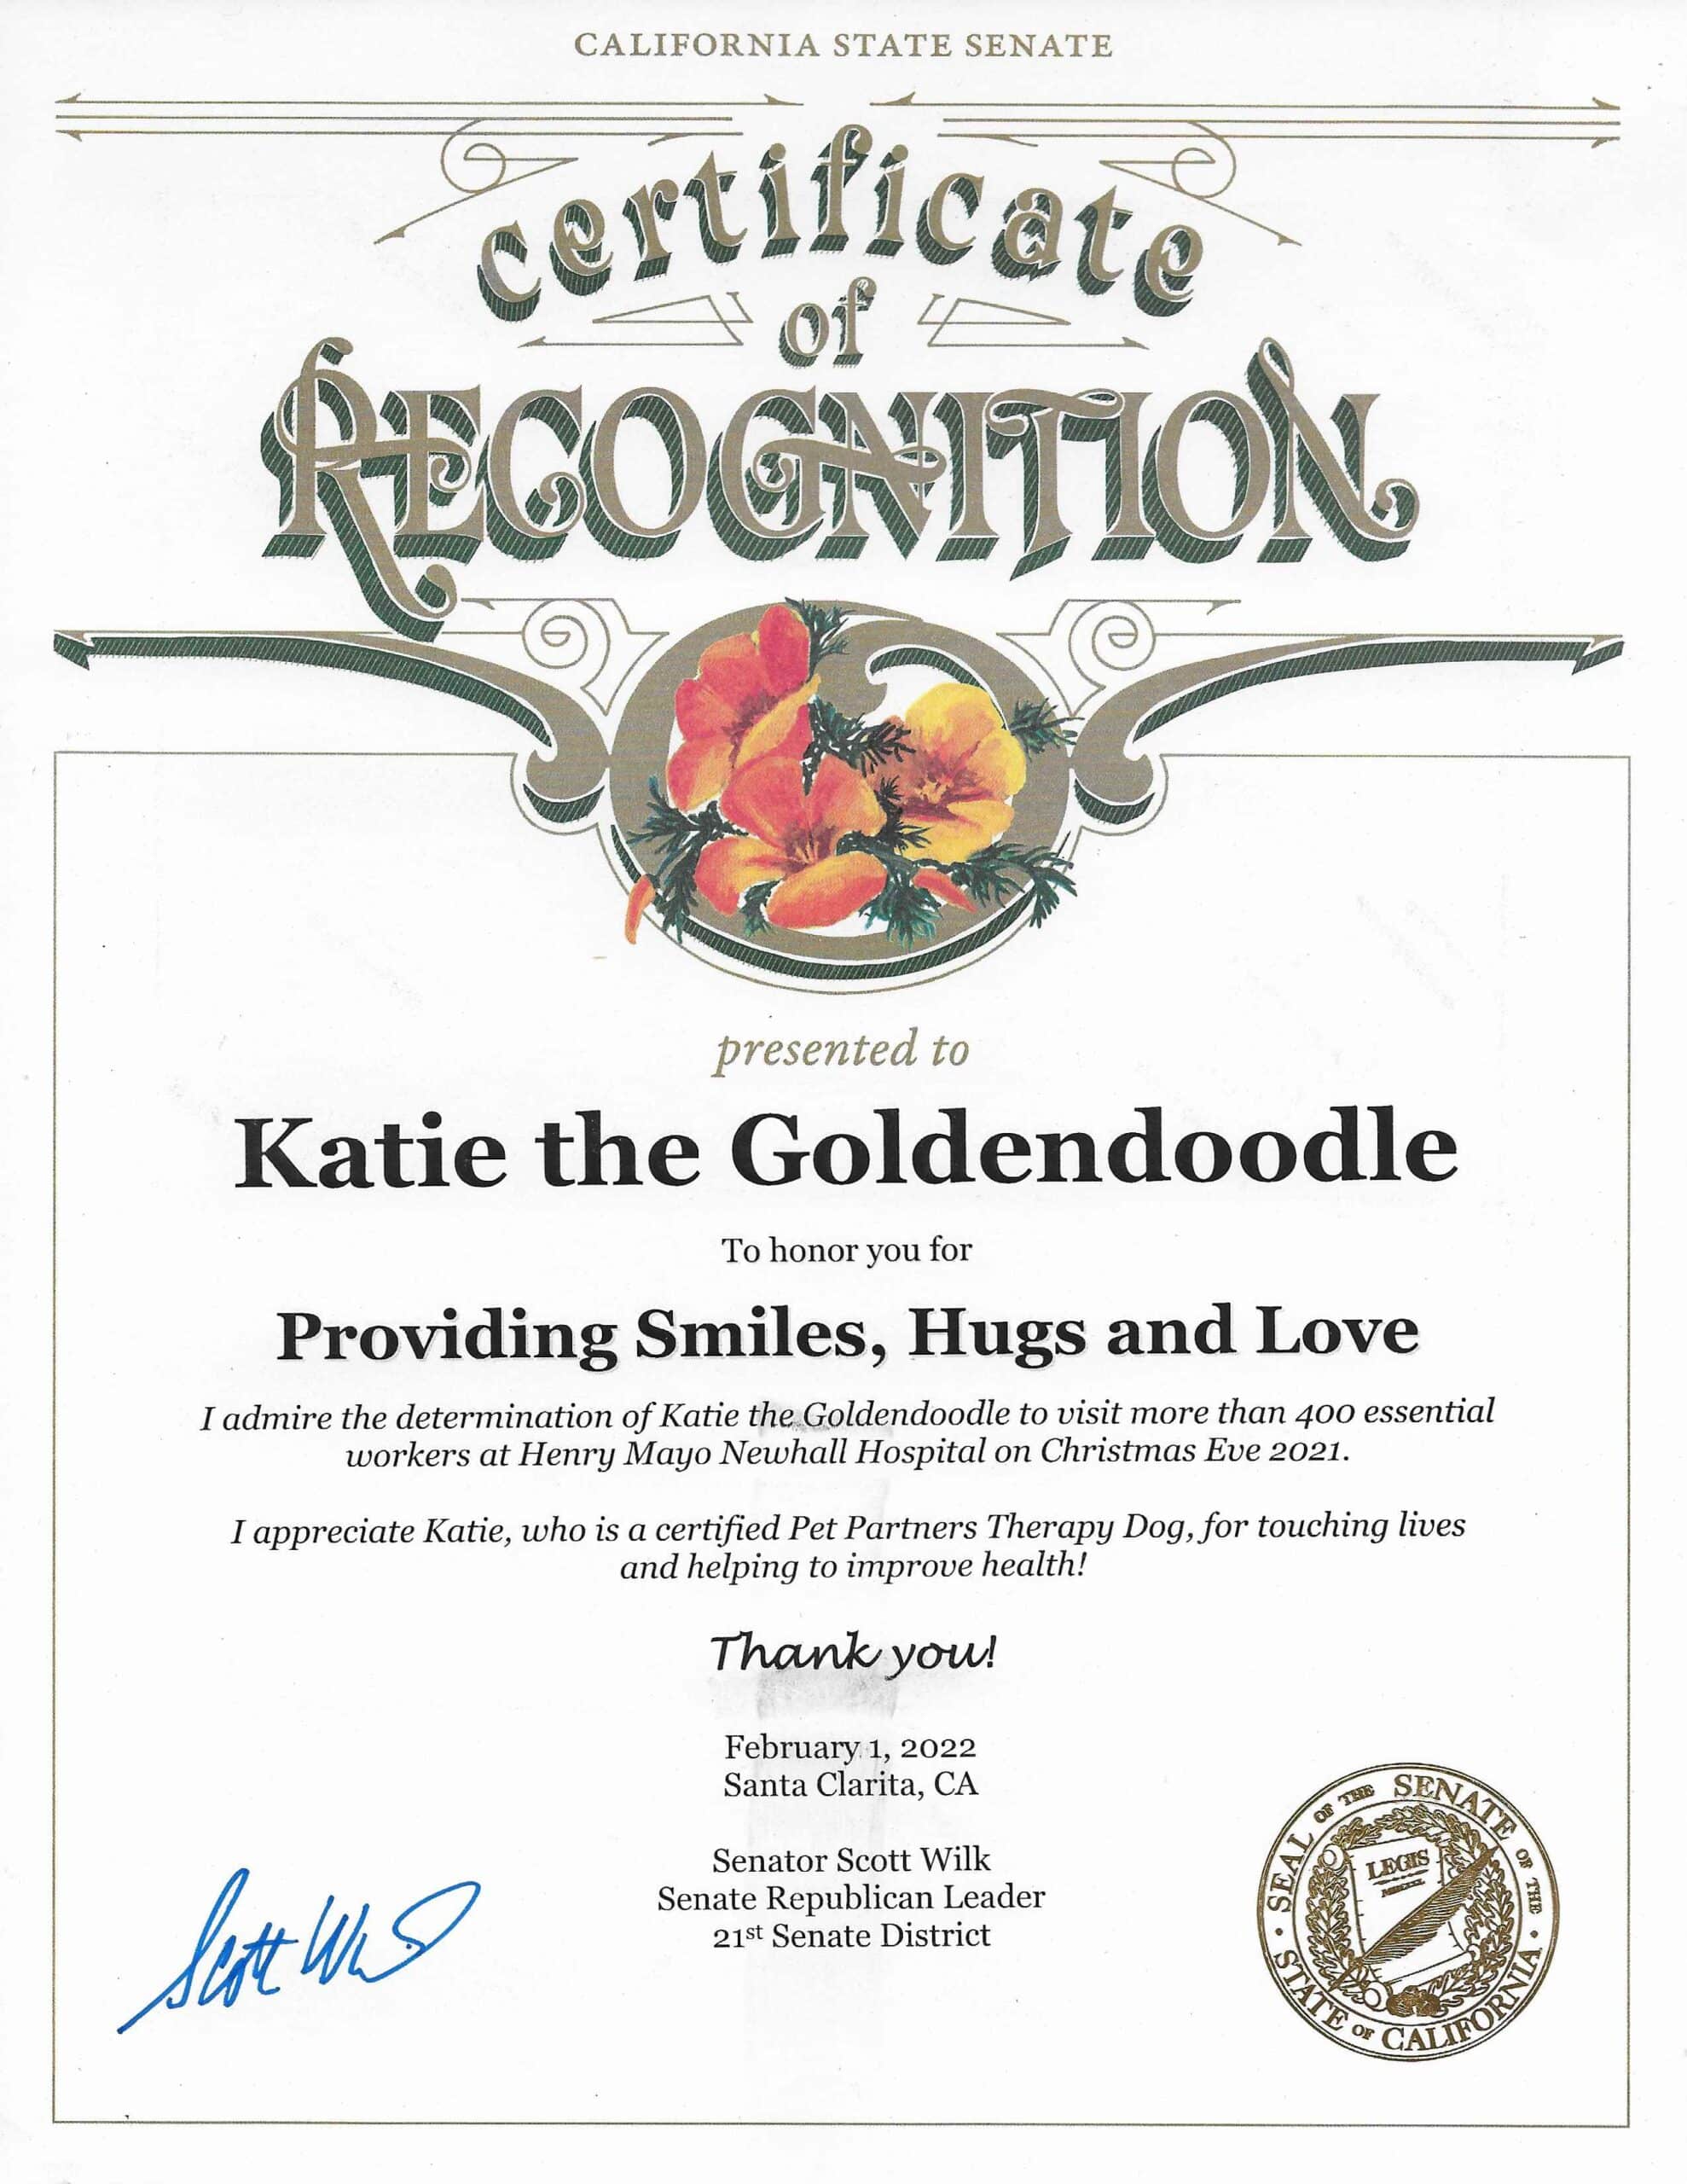 A certificate of recognition for Katie the Goldendoodle from California state Senator Scott Wilk.